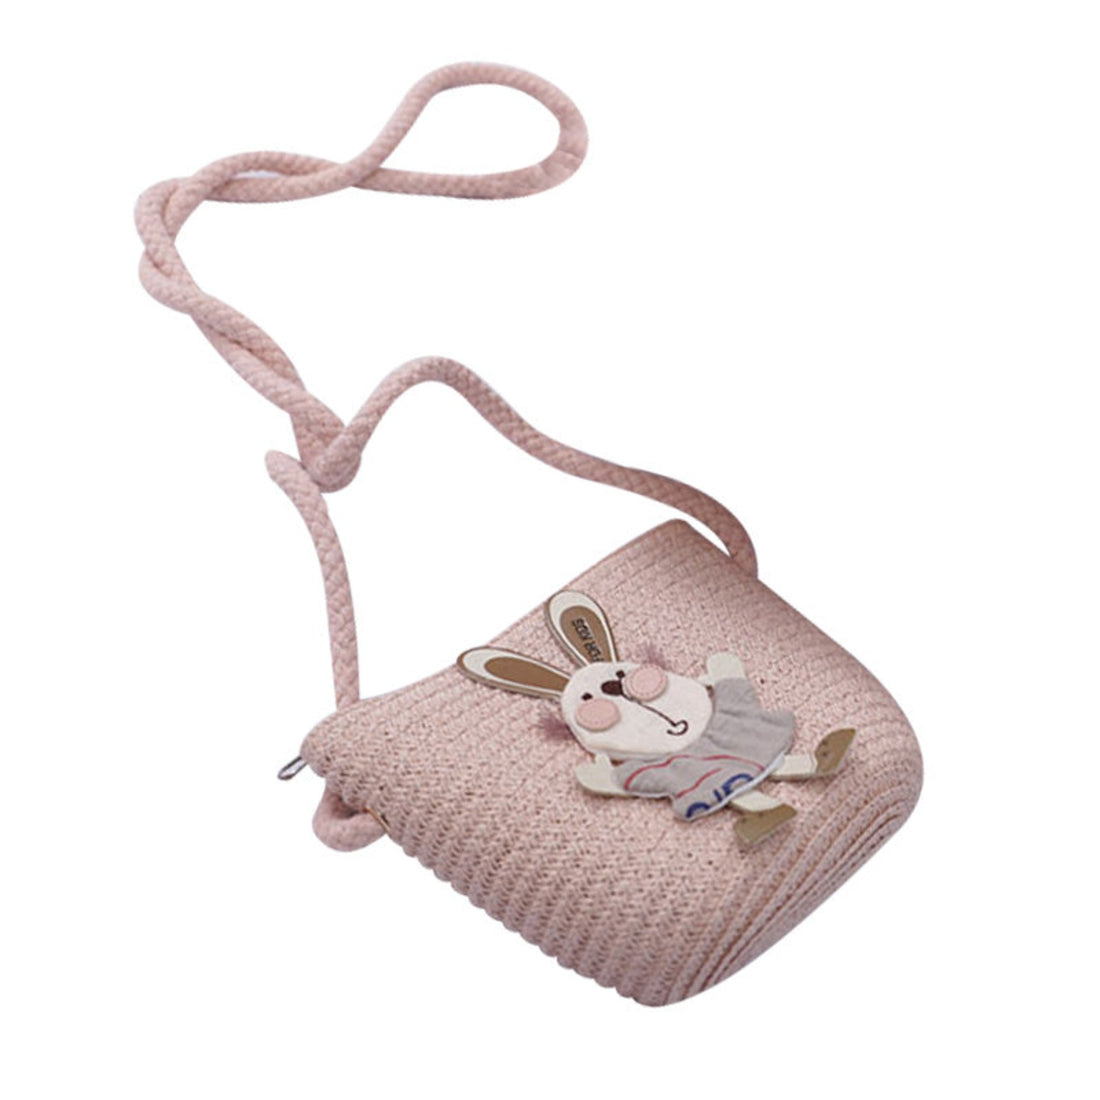 Adorable straw hat with rabbit decoration for kids